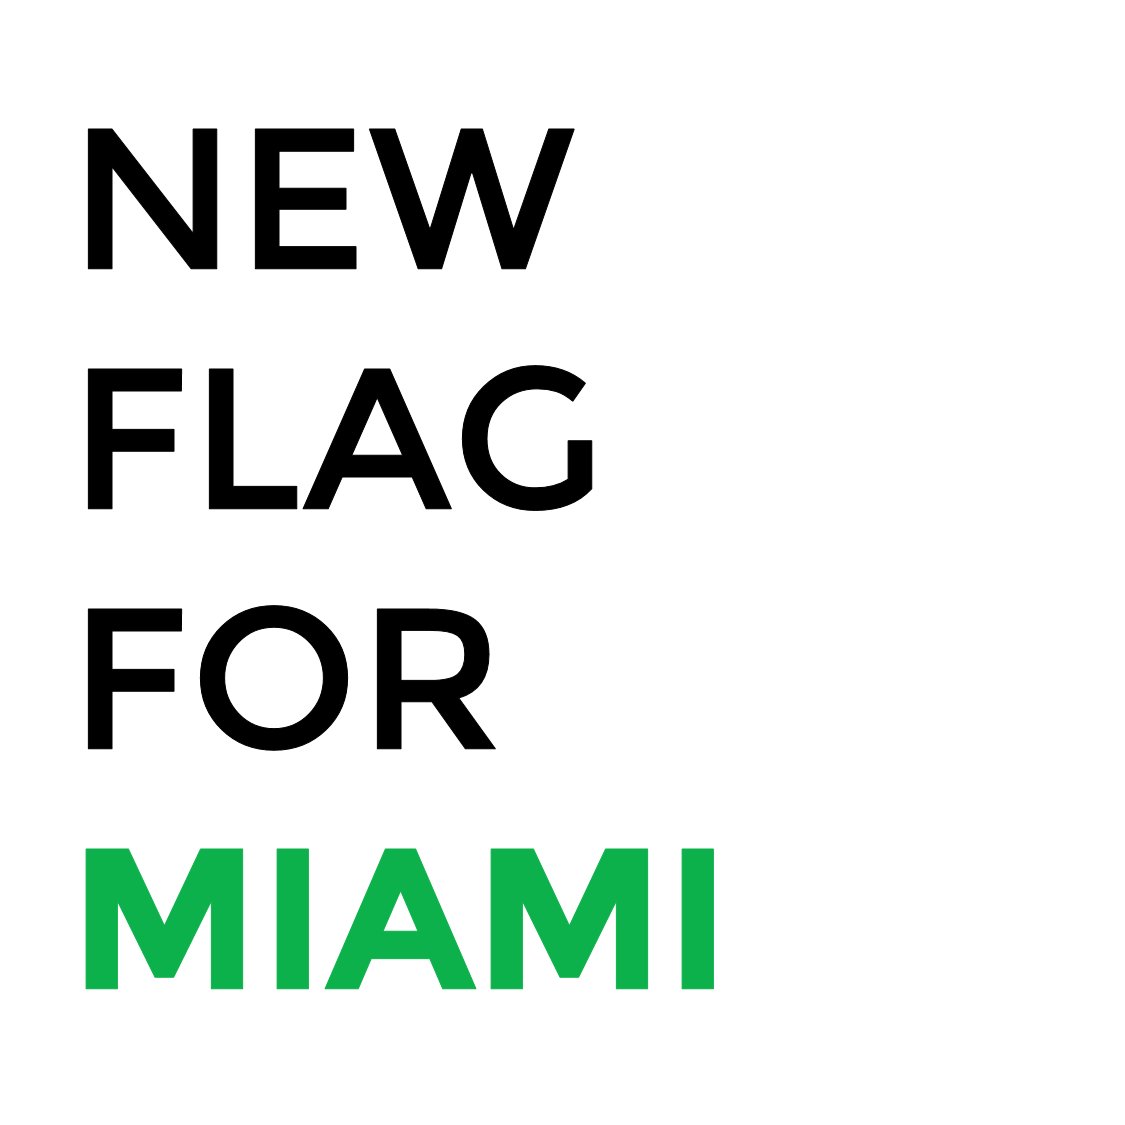 Inspired by similar movements across the country, we want a new flag that represents Miami better than what it has. An @opsindesign project.